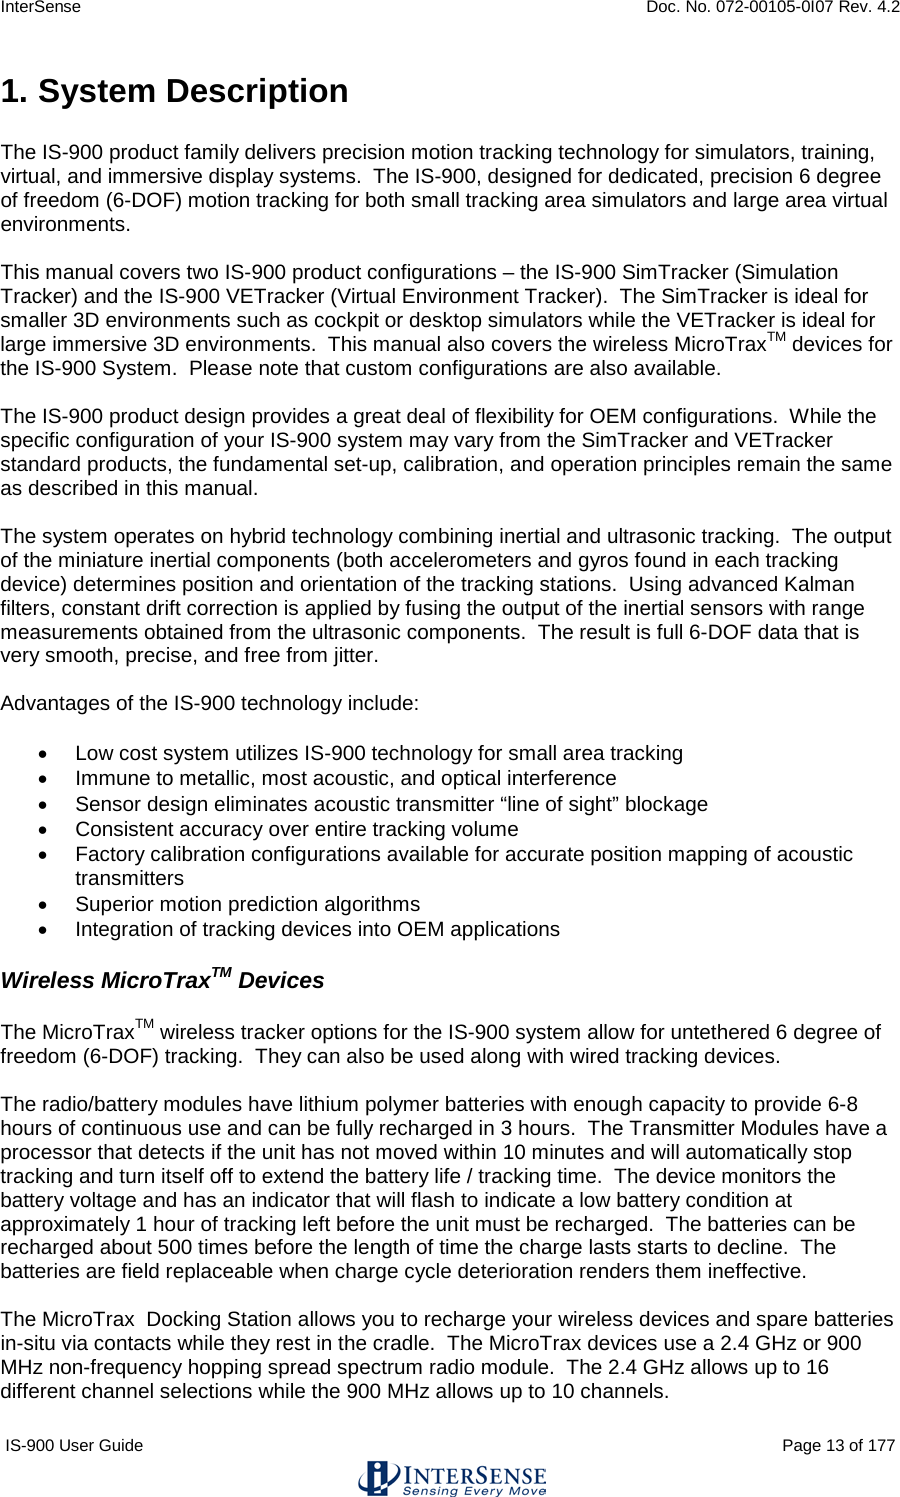 InterSense    Doc. No. 072-00105-0I07 Rev. 4.2 IS-900 User Guide                                                                                                                                          Page 13 of 177  1. System Description  The IS-900 product family delivers precision motion tracking technology for simulators, training, virtual, and immersive display systems.  The IS-900, designed for dedicated, precision 6 degree of freedom (6-DOF) motion tracking for both small tracking area simulators and large area virtual environments.  This manual covers two IS-900 product configurations – the IS-900 SimTracker (Simulation Tracker) and the IS-900 VETracker (Virtual Environment Tracker).  The SimTracker is ideal for smaller 3D environments such as cockpit or desktop simulators while the VETracker is ideal for large immersive 3D environments.  This manual also covers the wireless MicroTraxTM devices for the IS-900 System.  Please note that custom configurations are also available.  The IS-900 product design provides a great deal of flexibility for OEM configurations.  While the specific configuration of your IS-900 system may vary from the SimTracker and VETracker standard products, the fundamental set-up, calibration, and operation principles remain the same as described in this manual.  The system operates on hybrid technology combining inertial and ultrasonic tracking.  The output of the miniature inertial components (both accelerometers and gyros found in each tracking device) determines position and orientation of the tracking stations.  Using advanced Kalman filters, constant drift correction is applied by fusing the output of the inertial sensors with range measurements obtained from the ultrasonic components.  The result is full 6-DOF data that is very smooth, precise, and free from jitter.  Advantages of the IS-900 technology include:  • Low cost system utilizes IS-900 technology for small area tracking • Immune to metallic, most acoustic, and optical interference • Sensor design eliminates acoustic transmitter “line of sight” blockage • Consistent accuracy over entire tracking volume • Factory calibration configurations available for accurate position mapping of acoustic transmitters • Superior motion prediction algorithms • Integration of tracking devices into OEM applications  Wireless MicroTraxTM Devices  The MicroTraxTM wireless tracker options for the IS-900 system allow for untethered 6 degree of freedom (6-DOF) tracking.  They can also be used along with wired tracking devices.  The radio/battery modules have lithium polymer batteries with enough capacity to provide 6-8 hours of continuous use and can be fully recharged in 3 hours.  The Transmitter Modules have a processor that detects if the unit has not moved within 10 minutes and will automatically stop tracking and turn itself off to extend the battery life / tracking time.  The device monitors the battery voltage and has an indicator that will flash to indicate a low battery condition at approximately 1 hour of tracking left before the unit must be recharged.  The batteries can be recharged about 500 times before the length of time the charge lasts starts to decline.  The batteries are field replaceable when charge cycle deterioration renders them ineffective.   The MicroTrax  Docking Station allows you to recharge your wireless devices and spare batteries in-situ via contacts while they rest in the cradle.  The MicroTrax devices use a 2.4 GHz or 900 MHz non-frequency hopping spread spectrum radio module.  The 2.4 GHz allows up to 16 different channel selections while the 900 MHz allows up to 10 channels. 